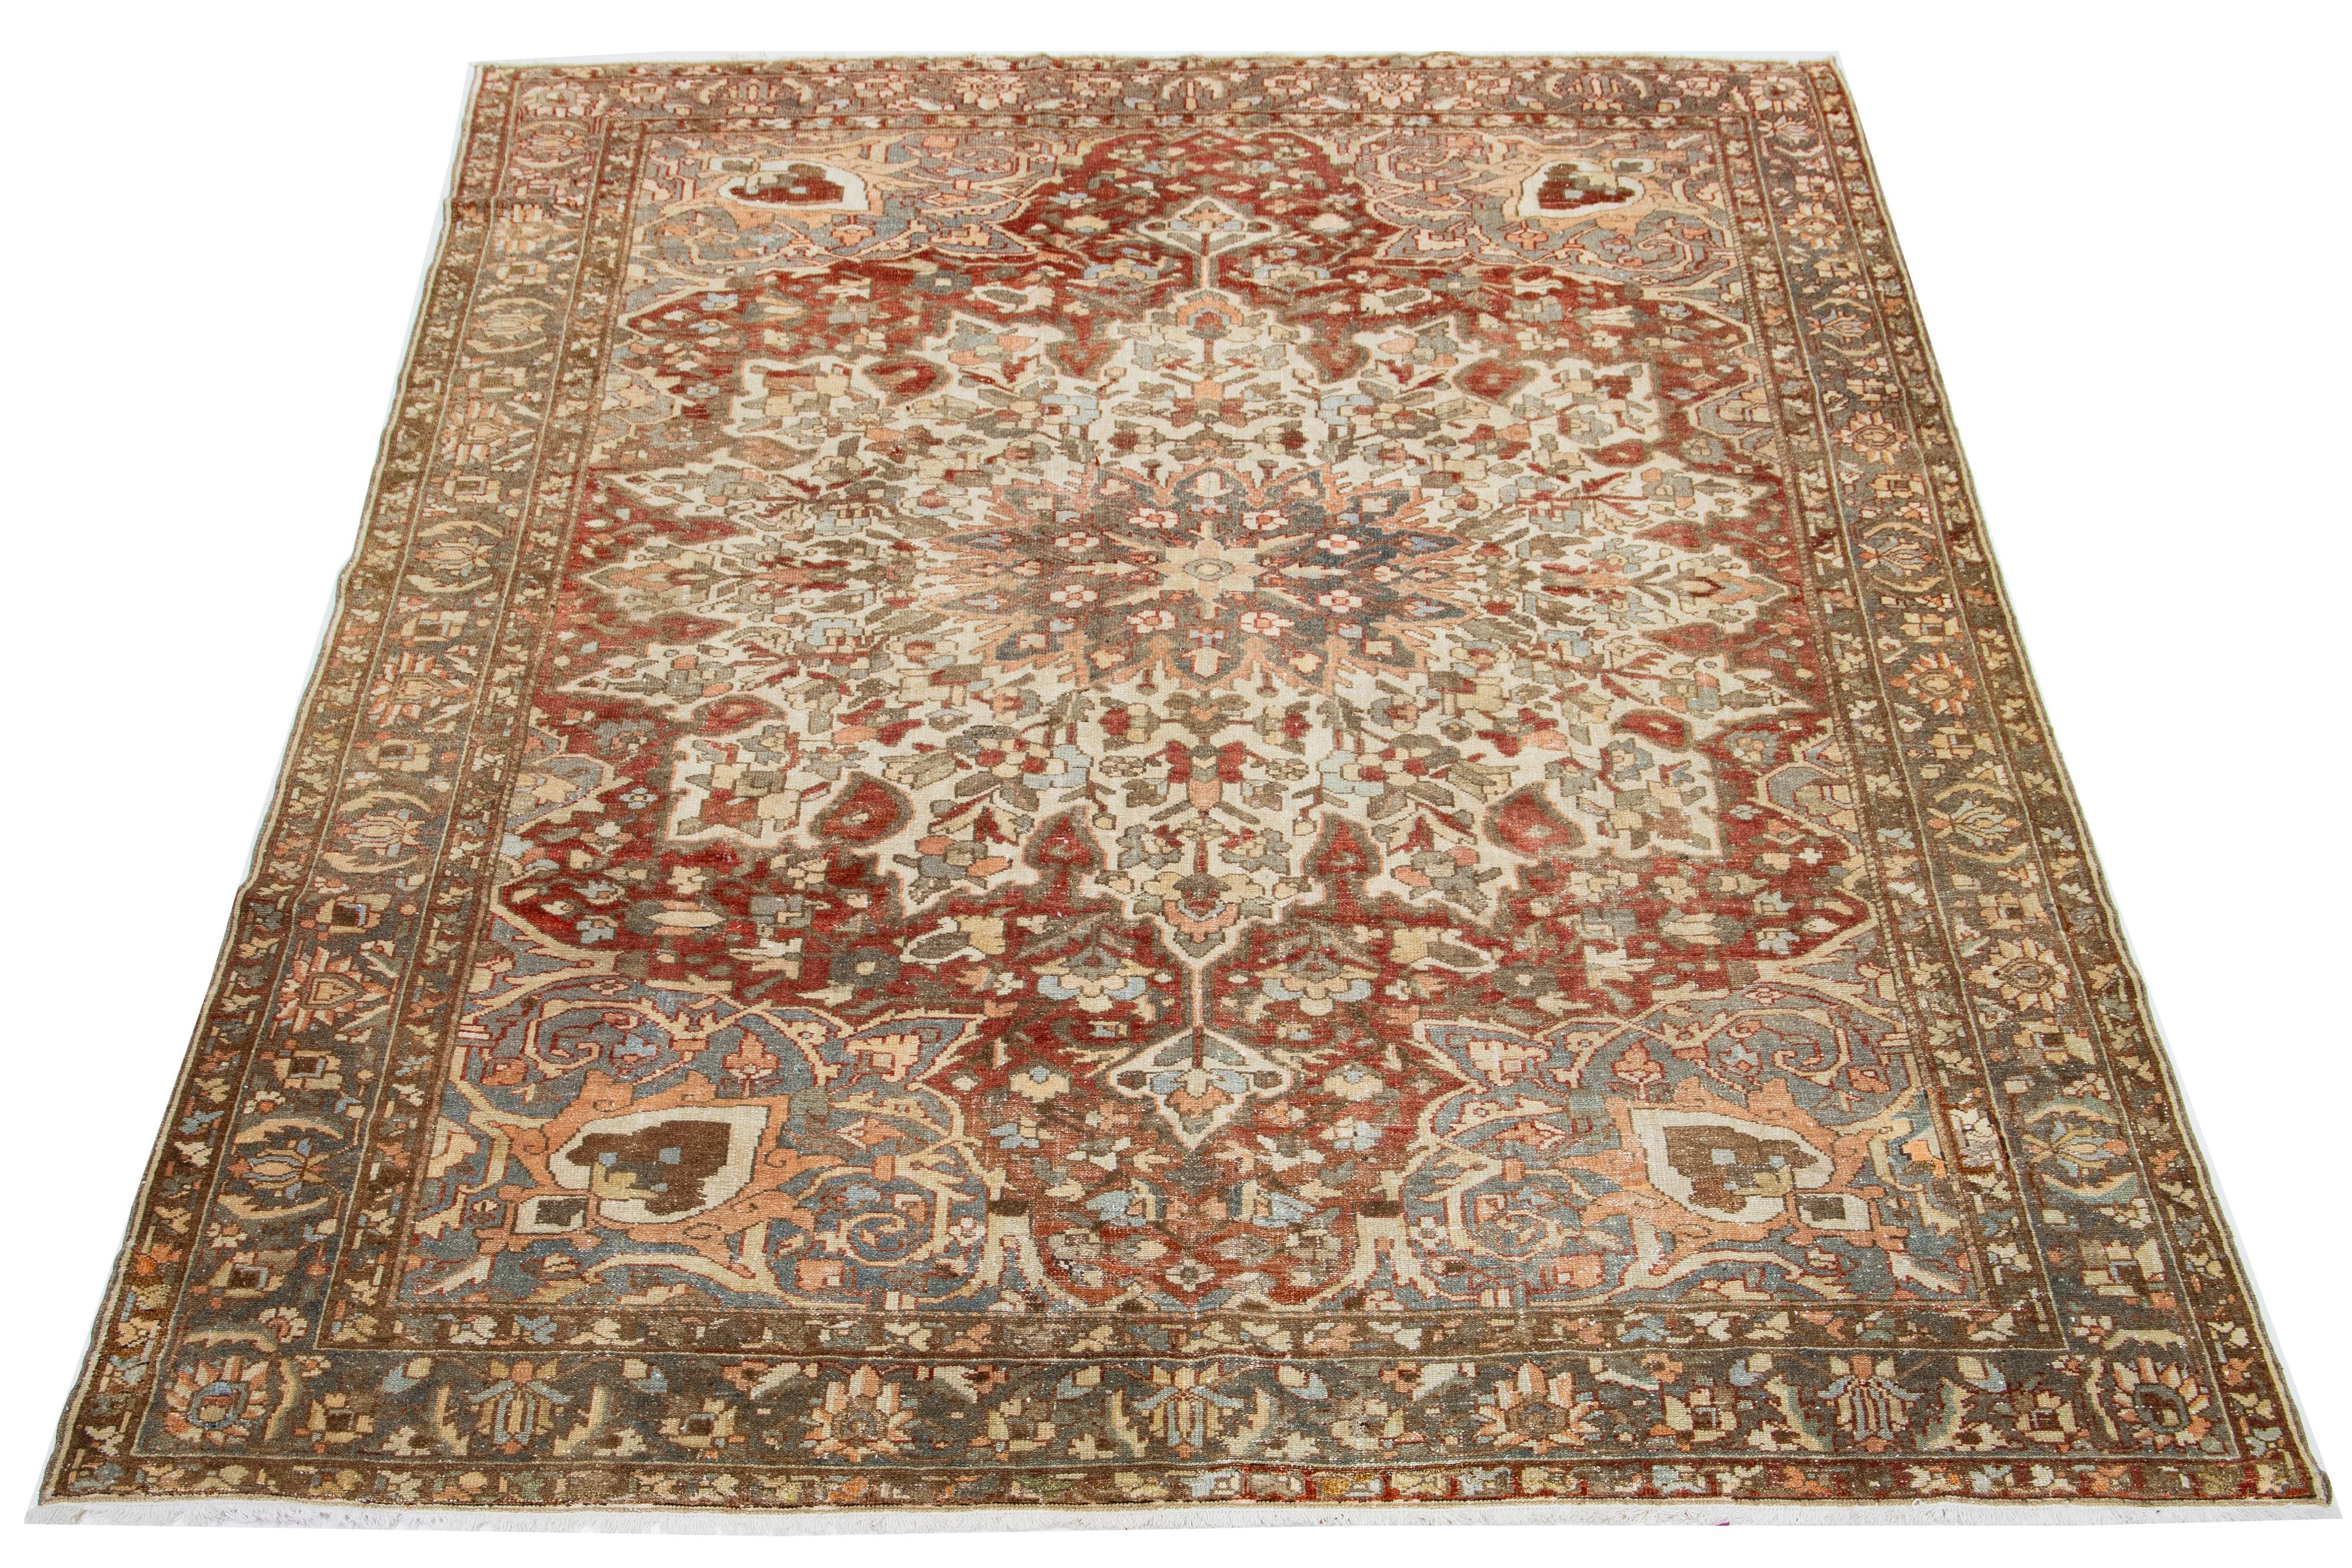 This is a beautiful Antique Bakhtiari hand-knotted wool rug with a rust-colored field. The Persian rug showcases a timeless rosette motif with peach, beige, and blue hues.

This rug measures 9'1